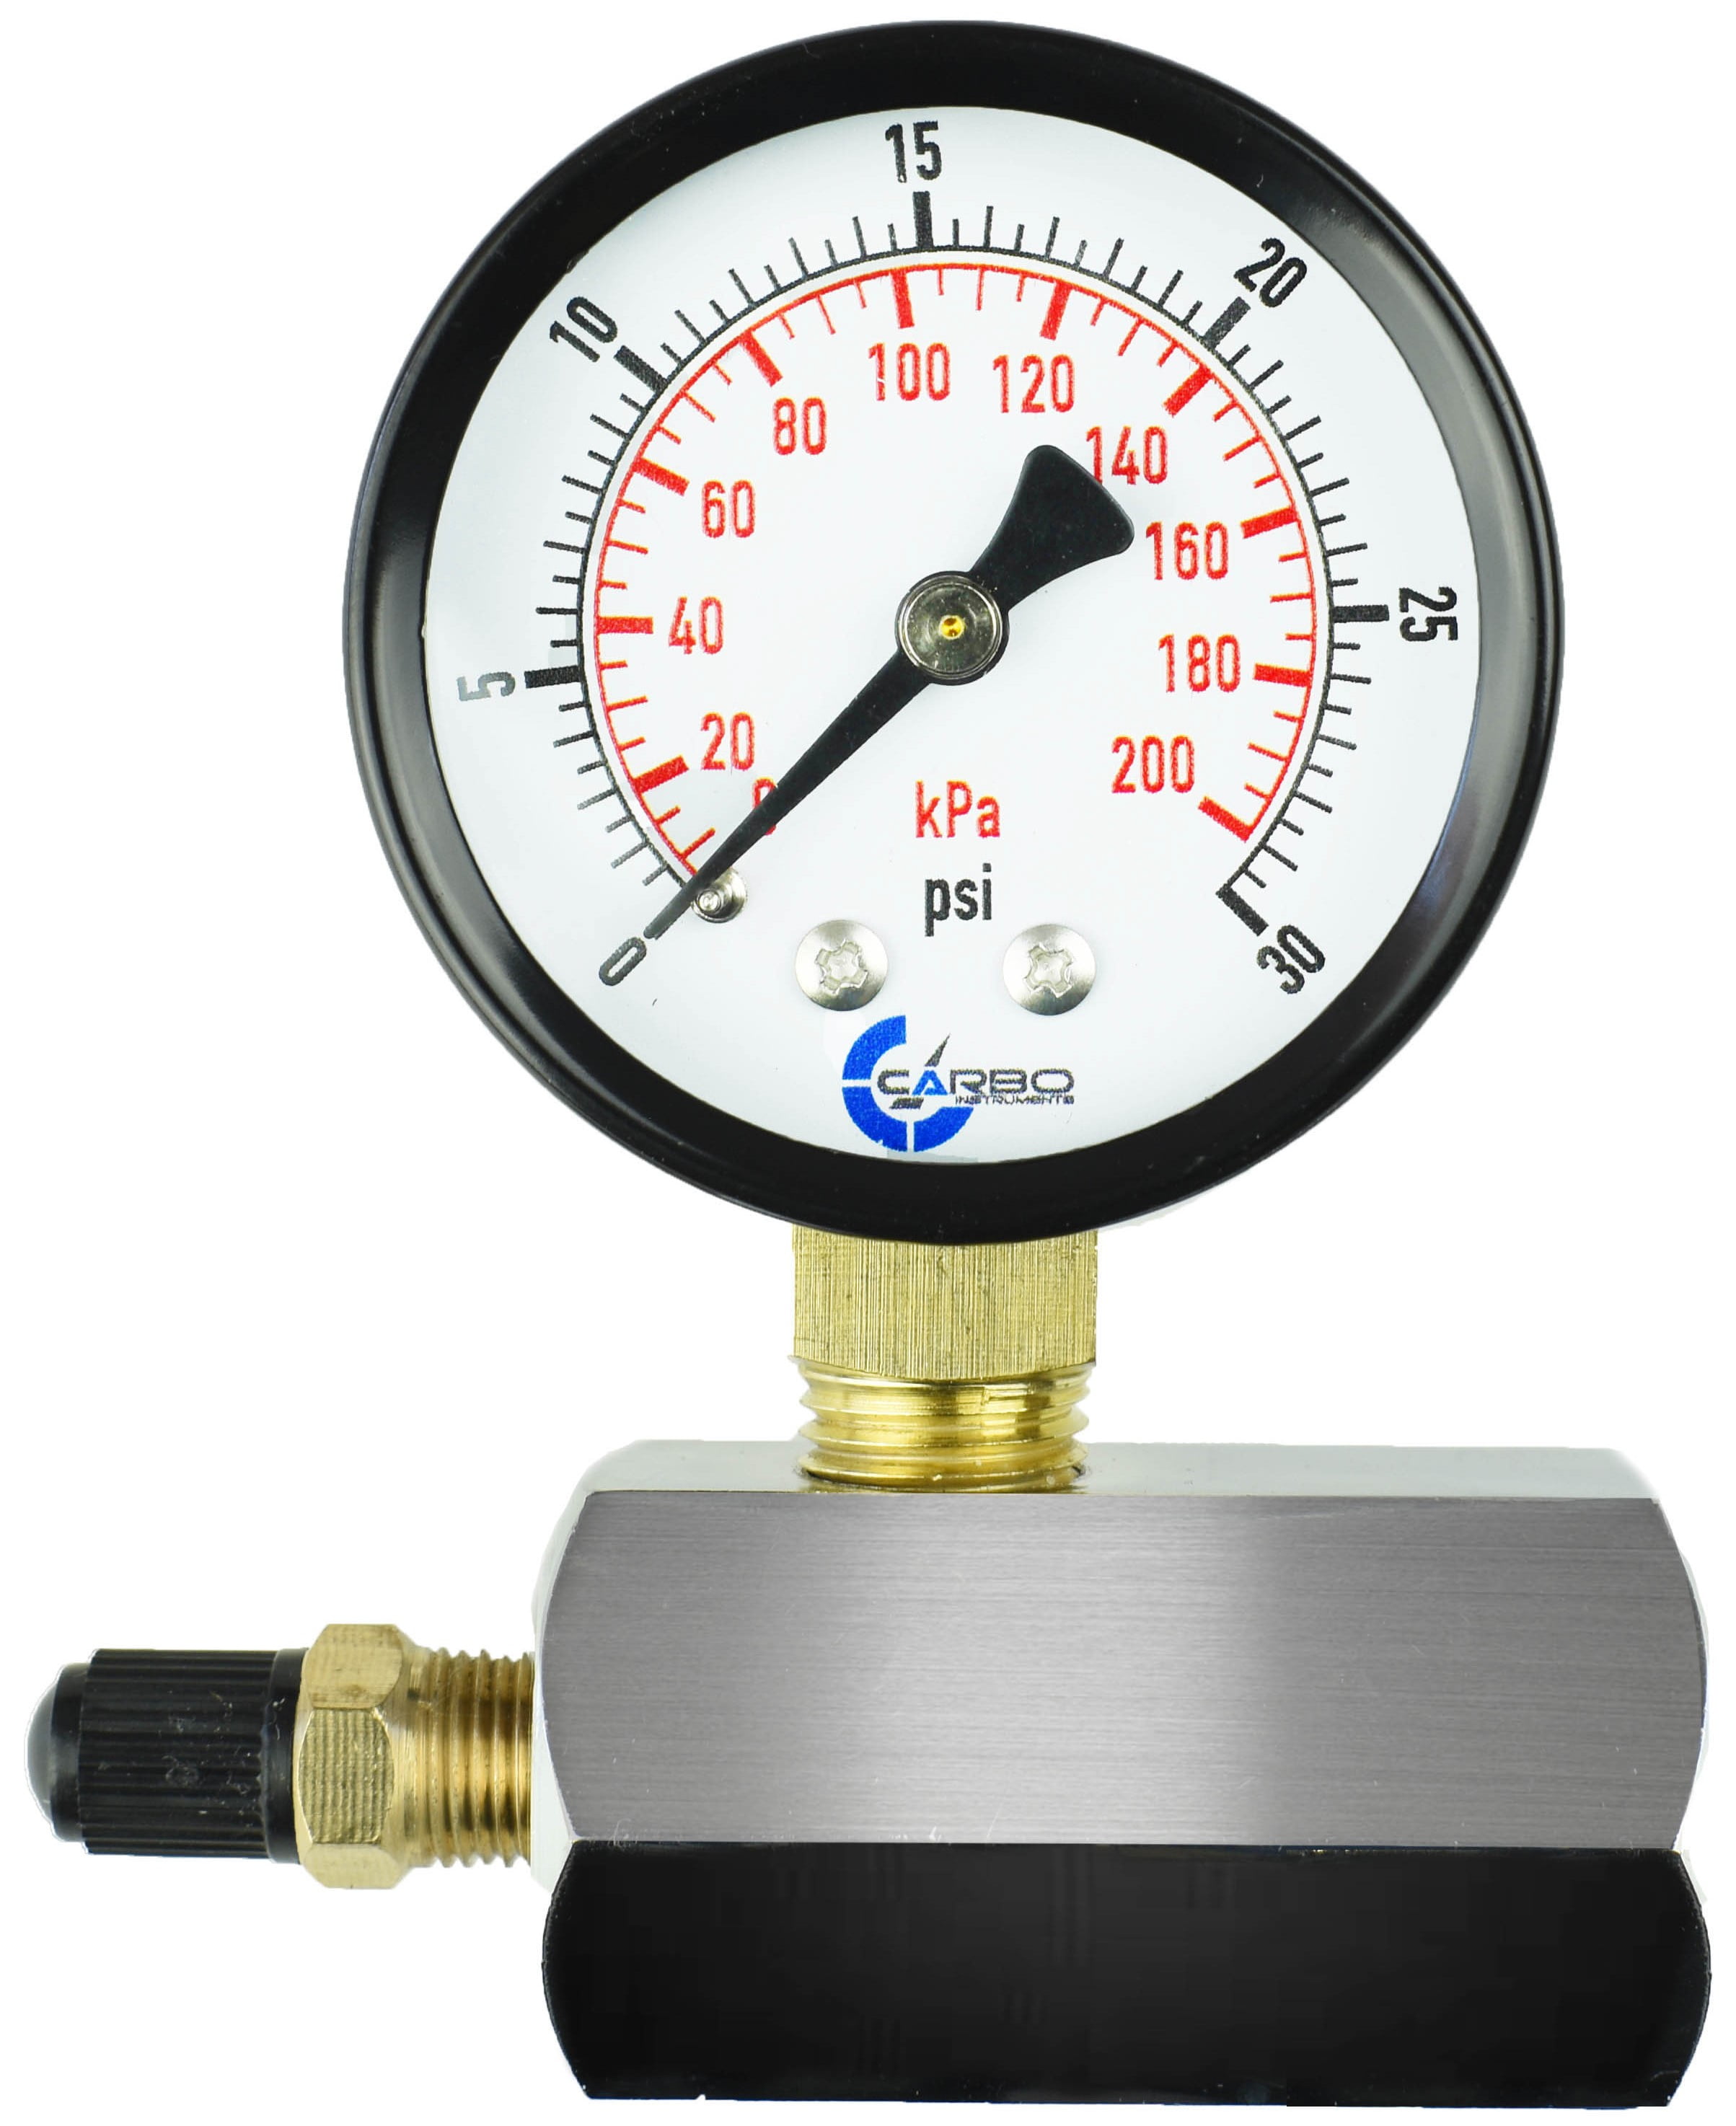 200 kPa 3/4” FNPT Connection Assembly Gas Test Pressure Gauge 30 Pound 30 PSI 